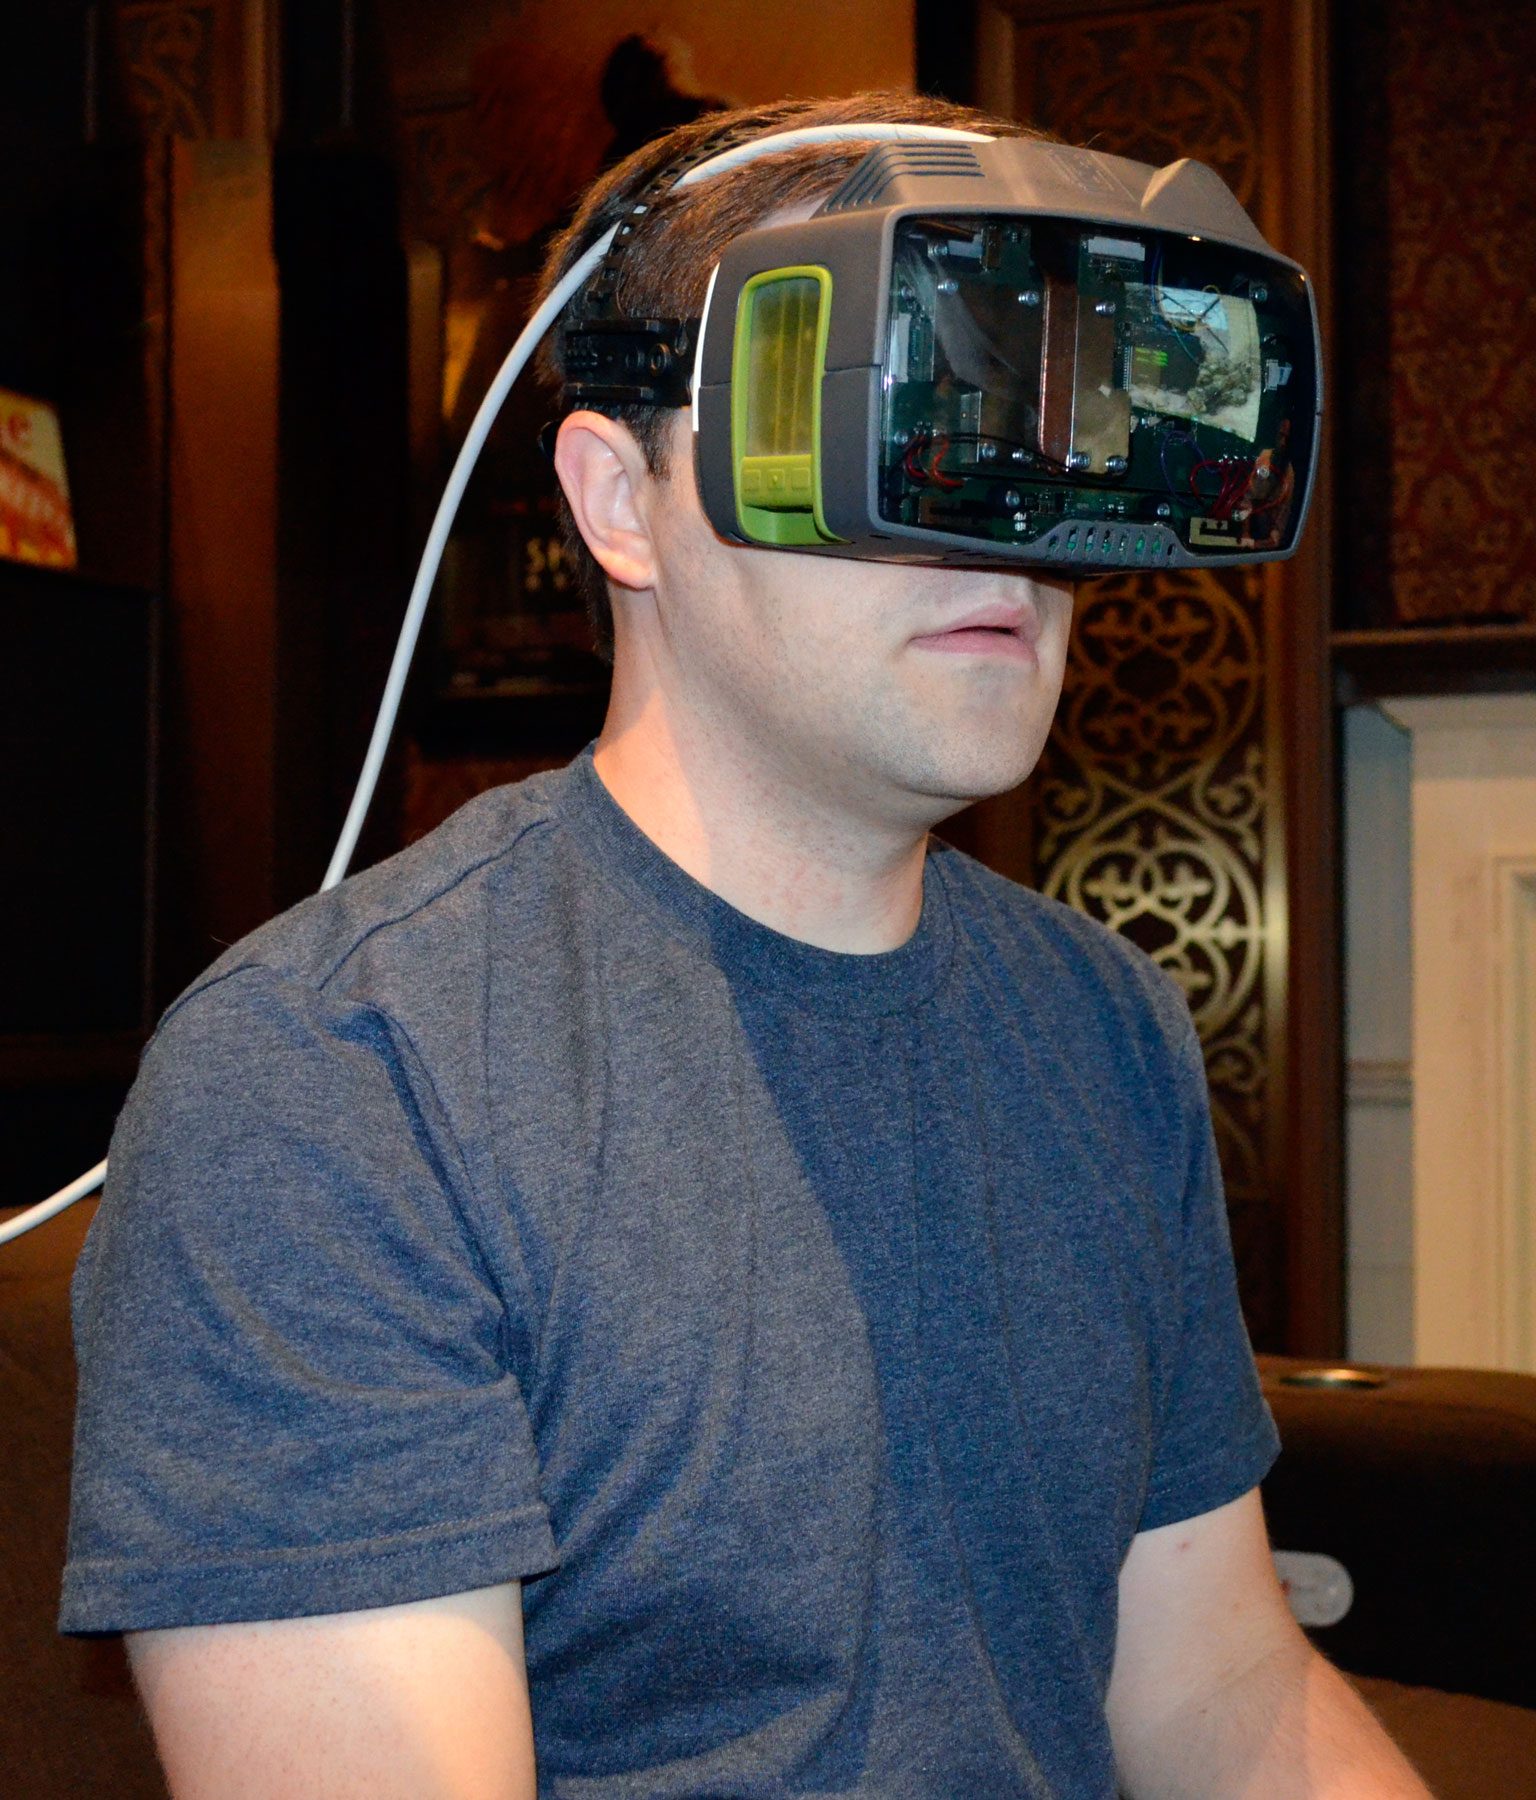 "Guarantees" Latency Equal to VR, 6 Prototype Field of View Impresses Road to VR